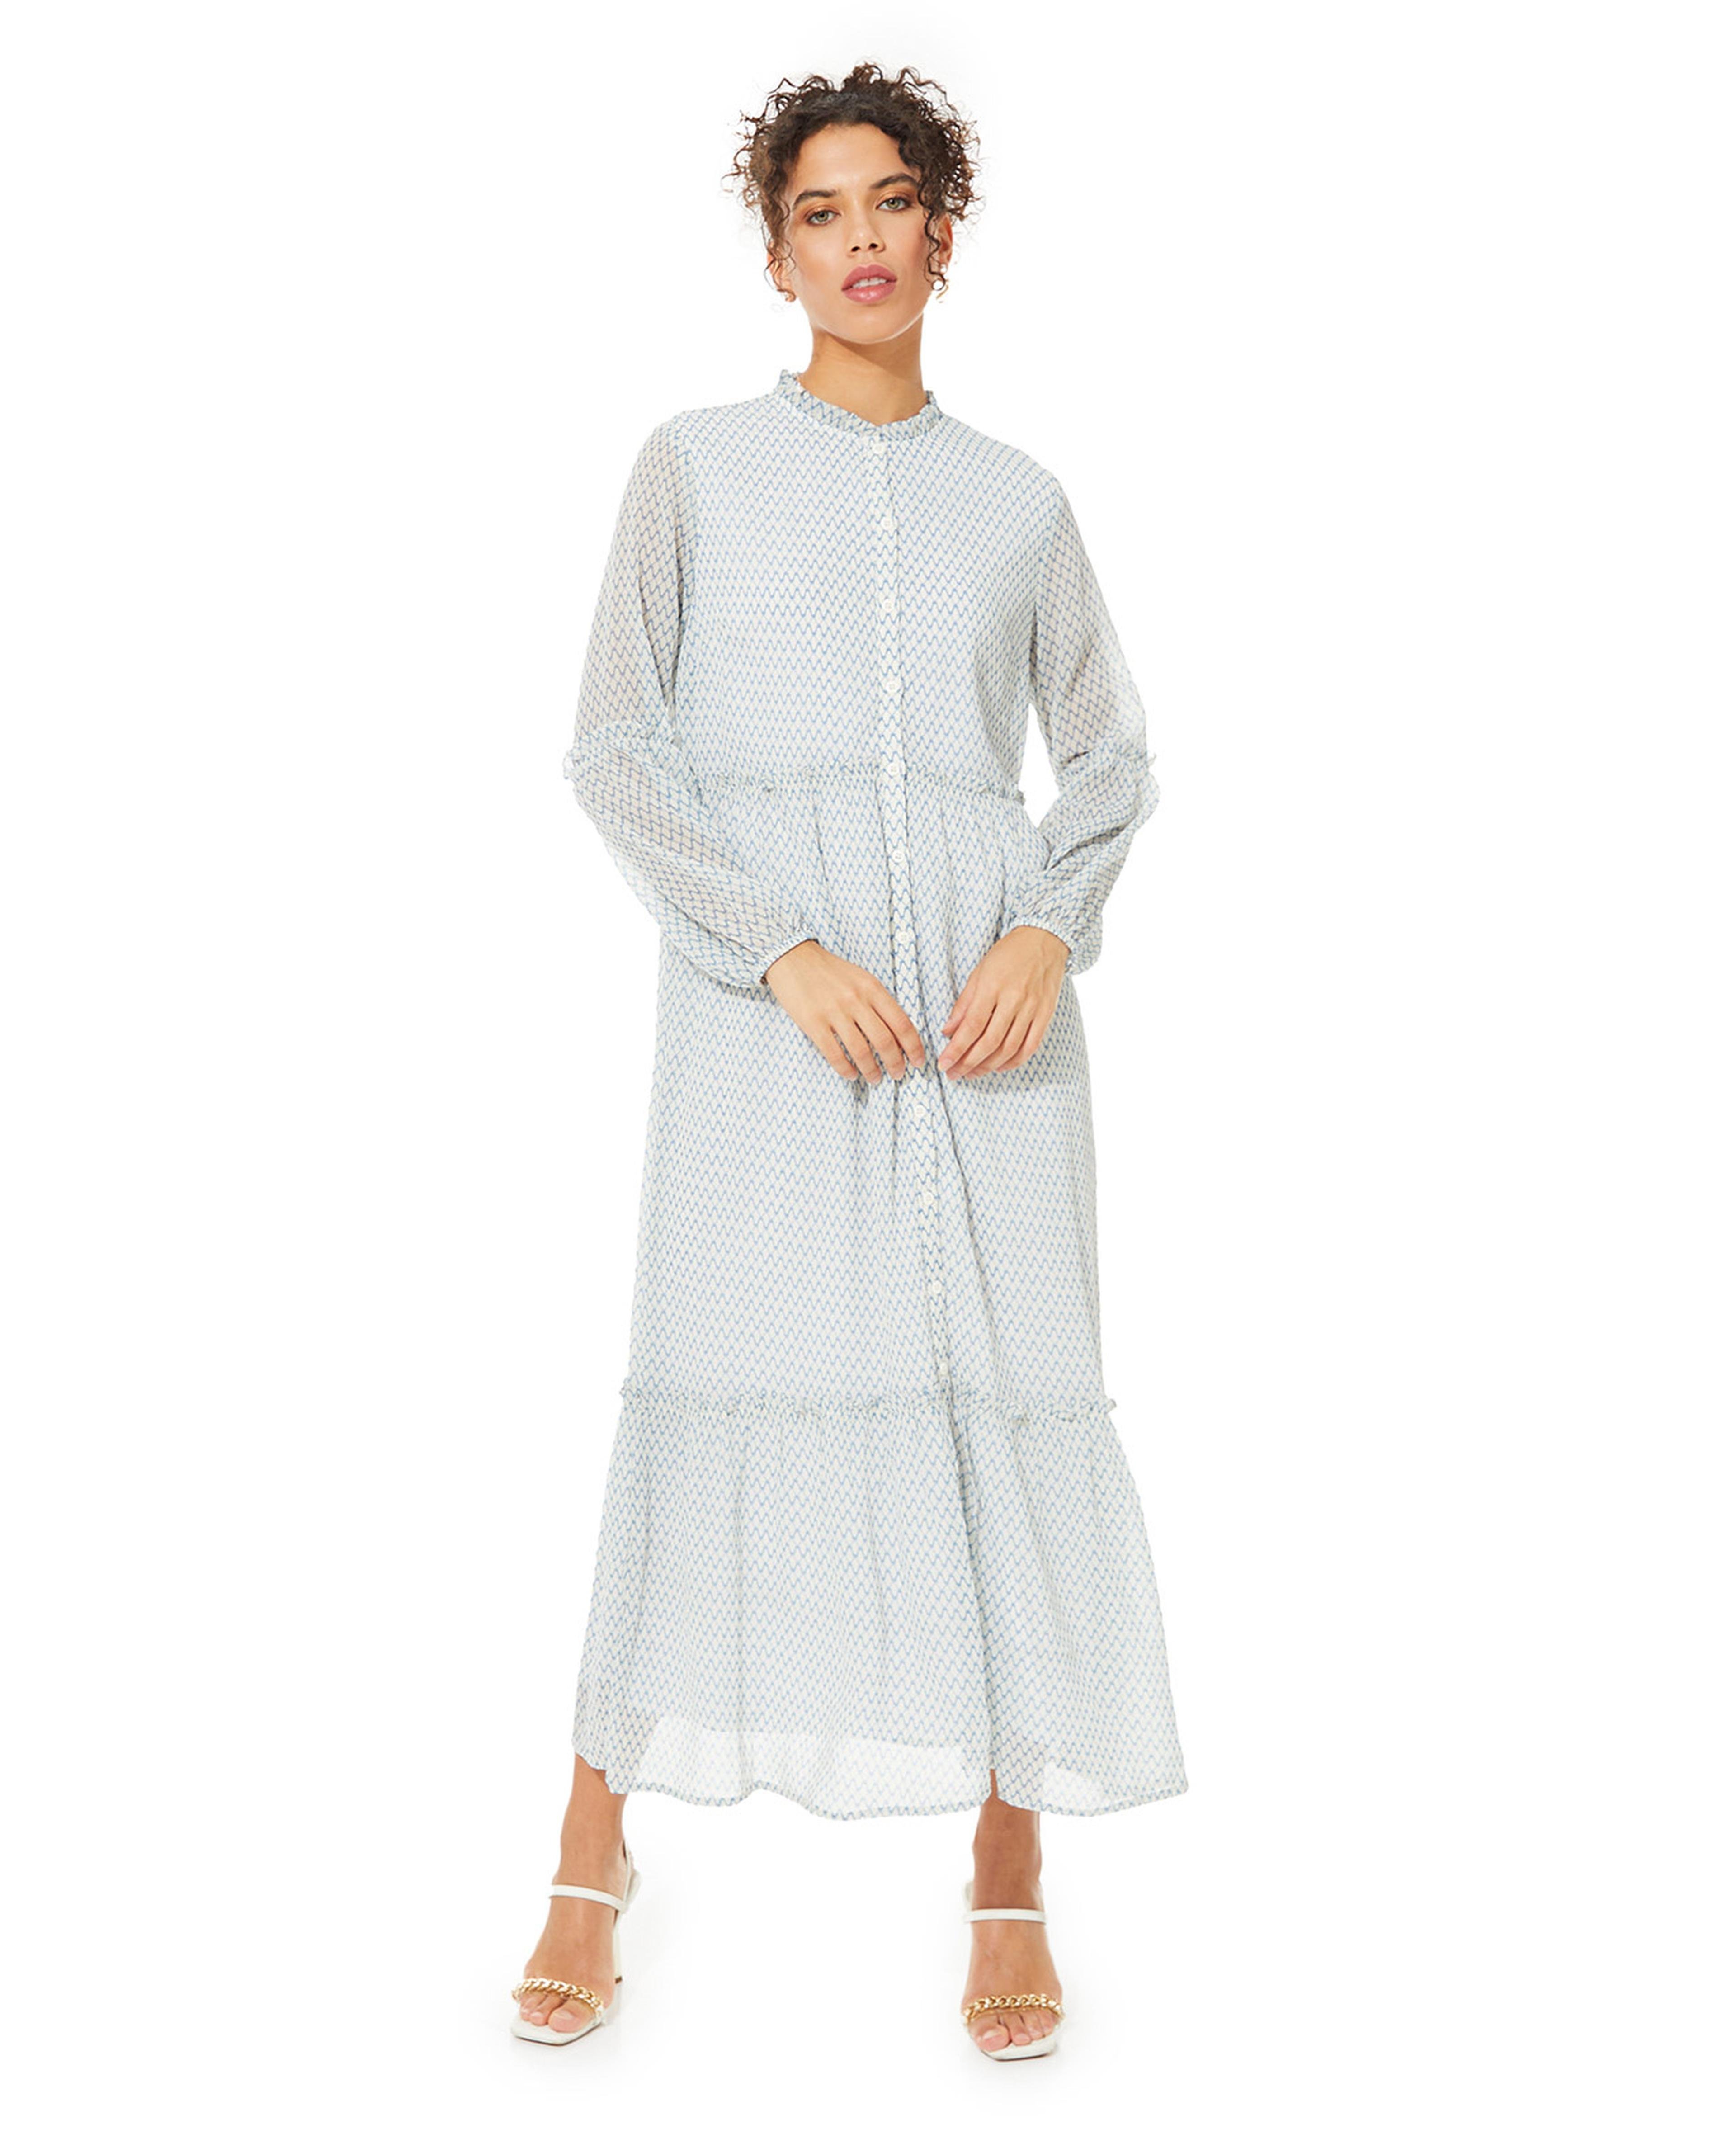 Printed Maxi Dress with Crew Neck and Long Sleeves